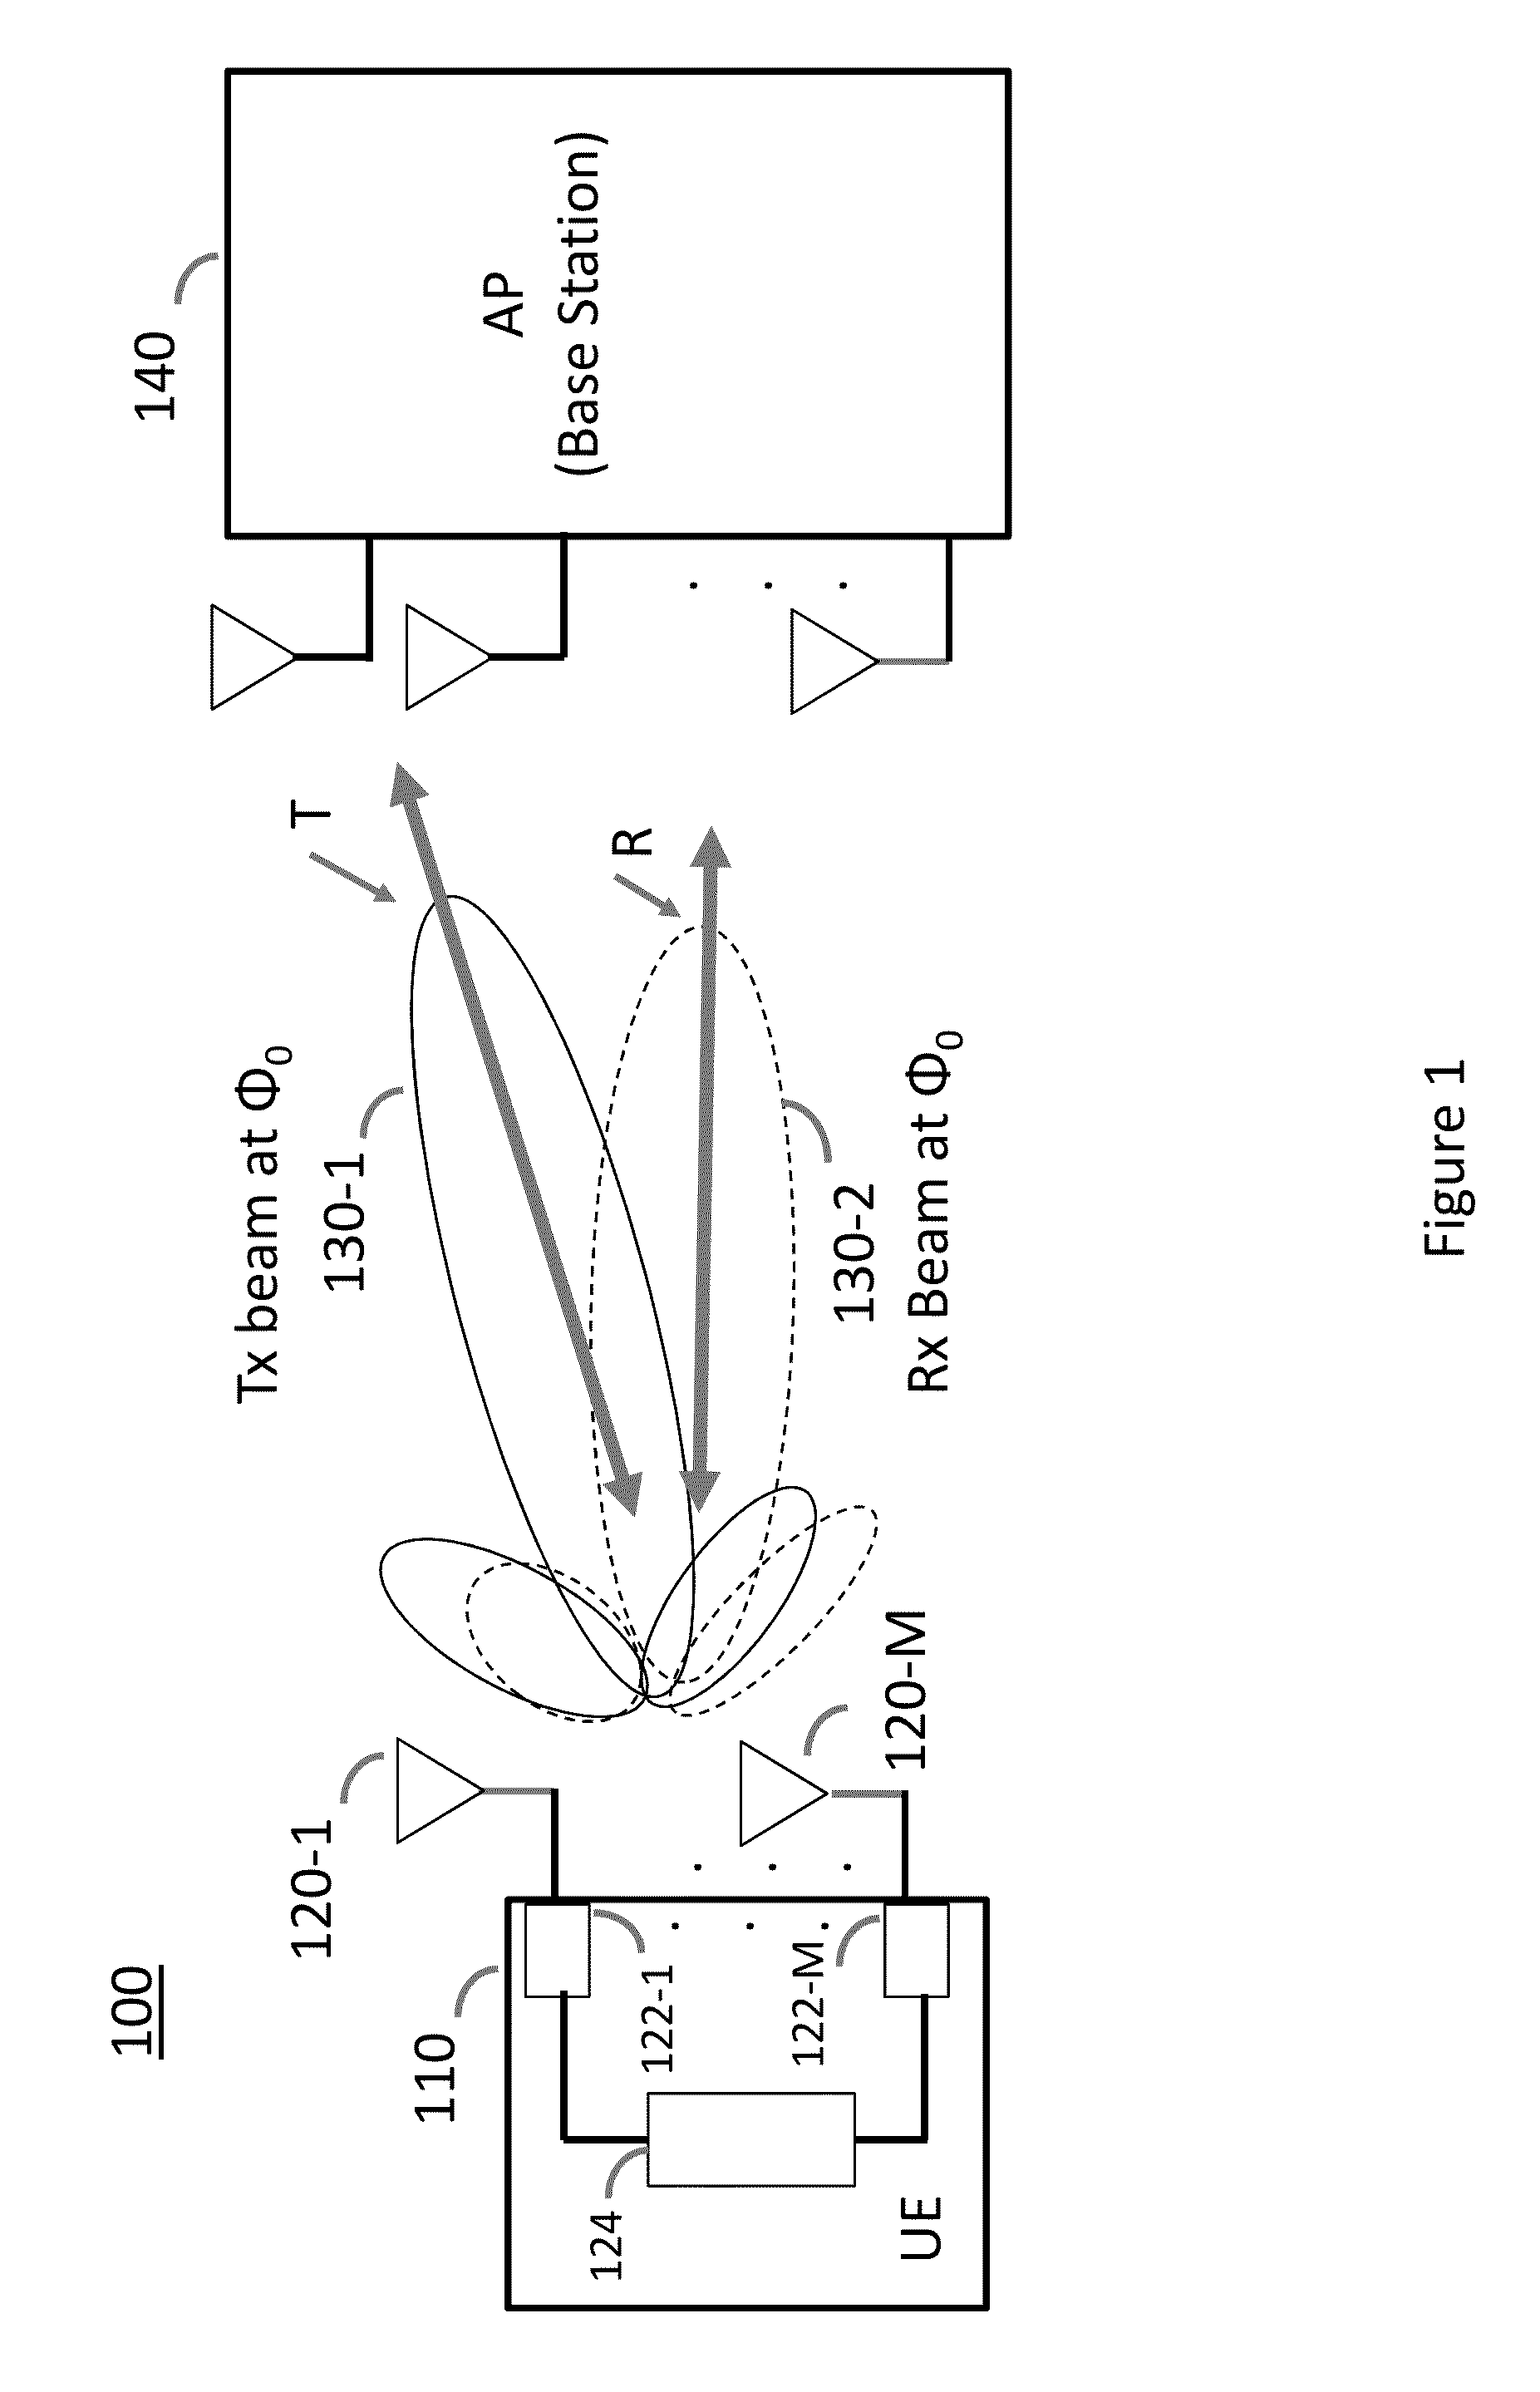 System and method for transmit and receive antenna patterns calibration for time division duplex (TDD) systems